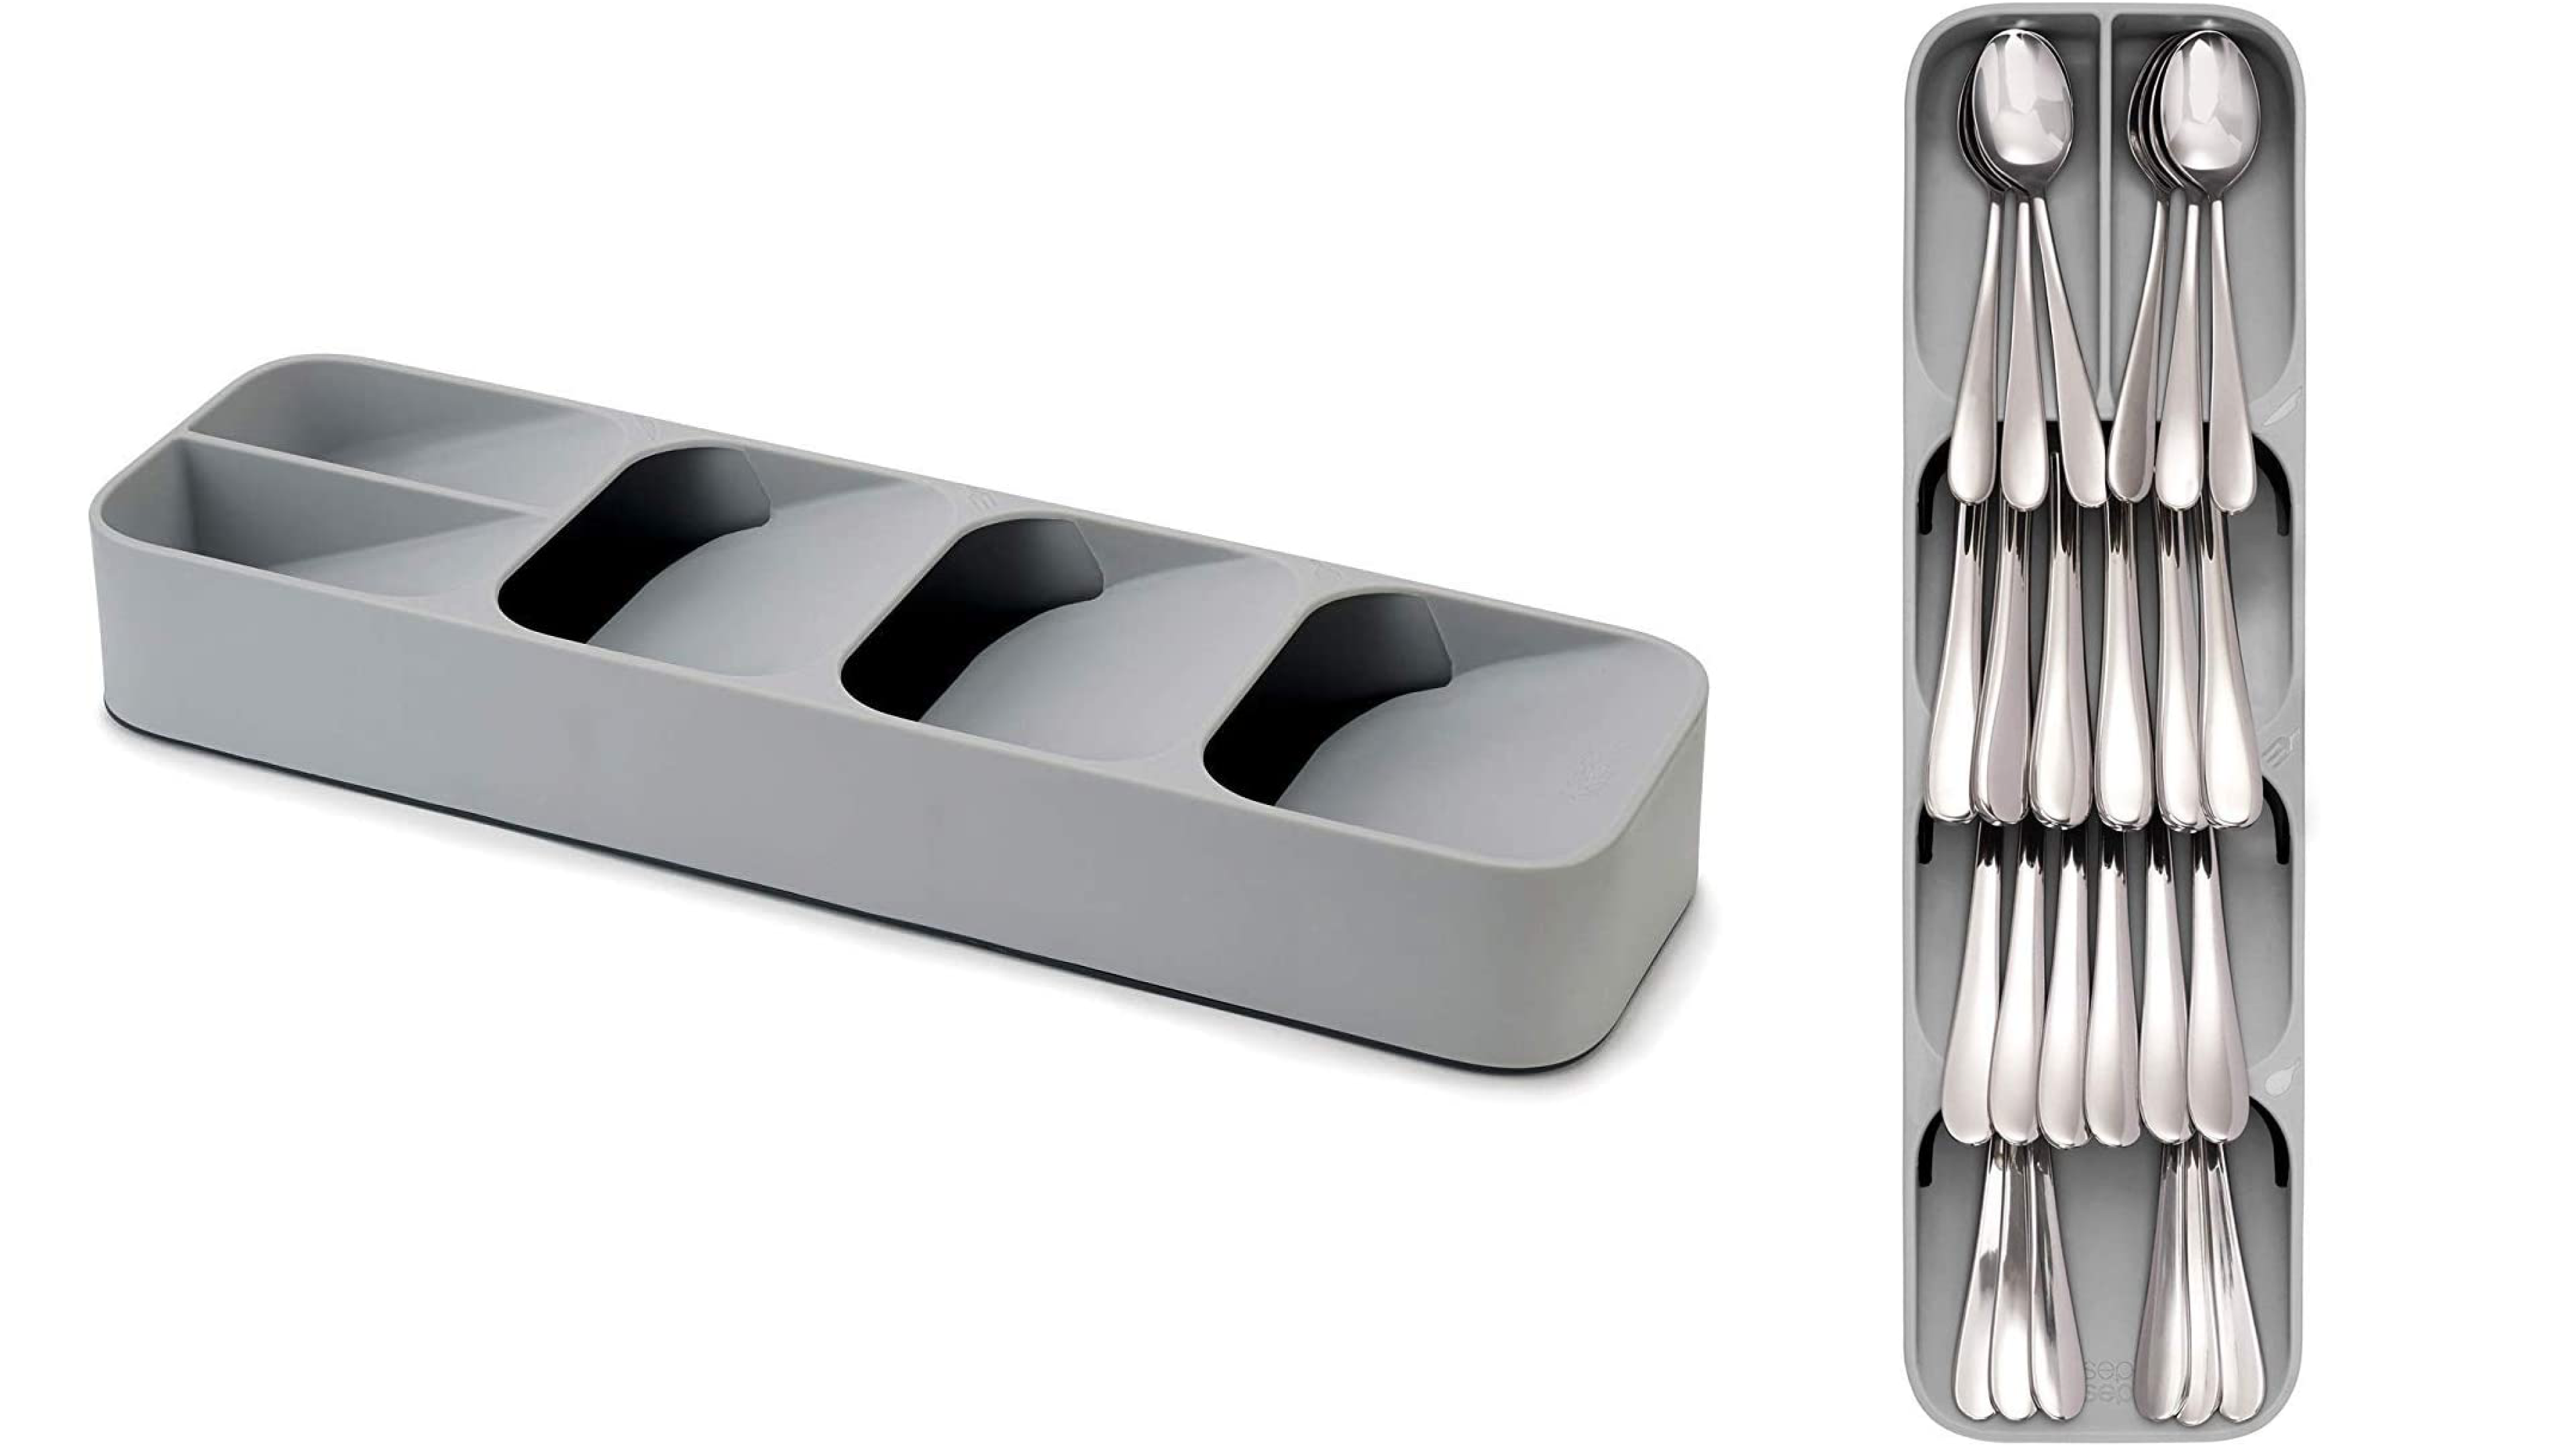 tiered cutlery tray that stacks everything in vertical slots